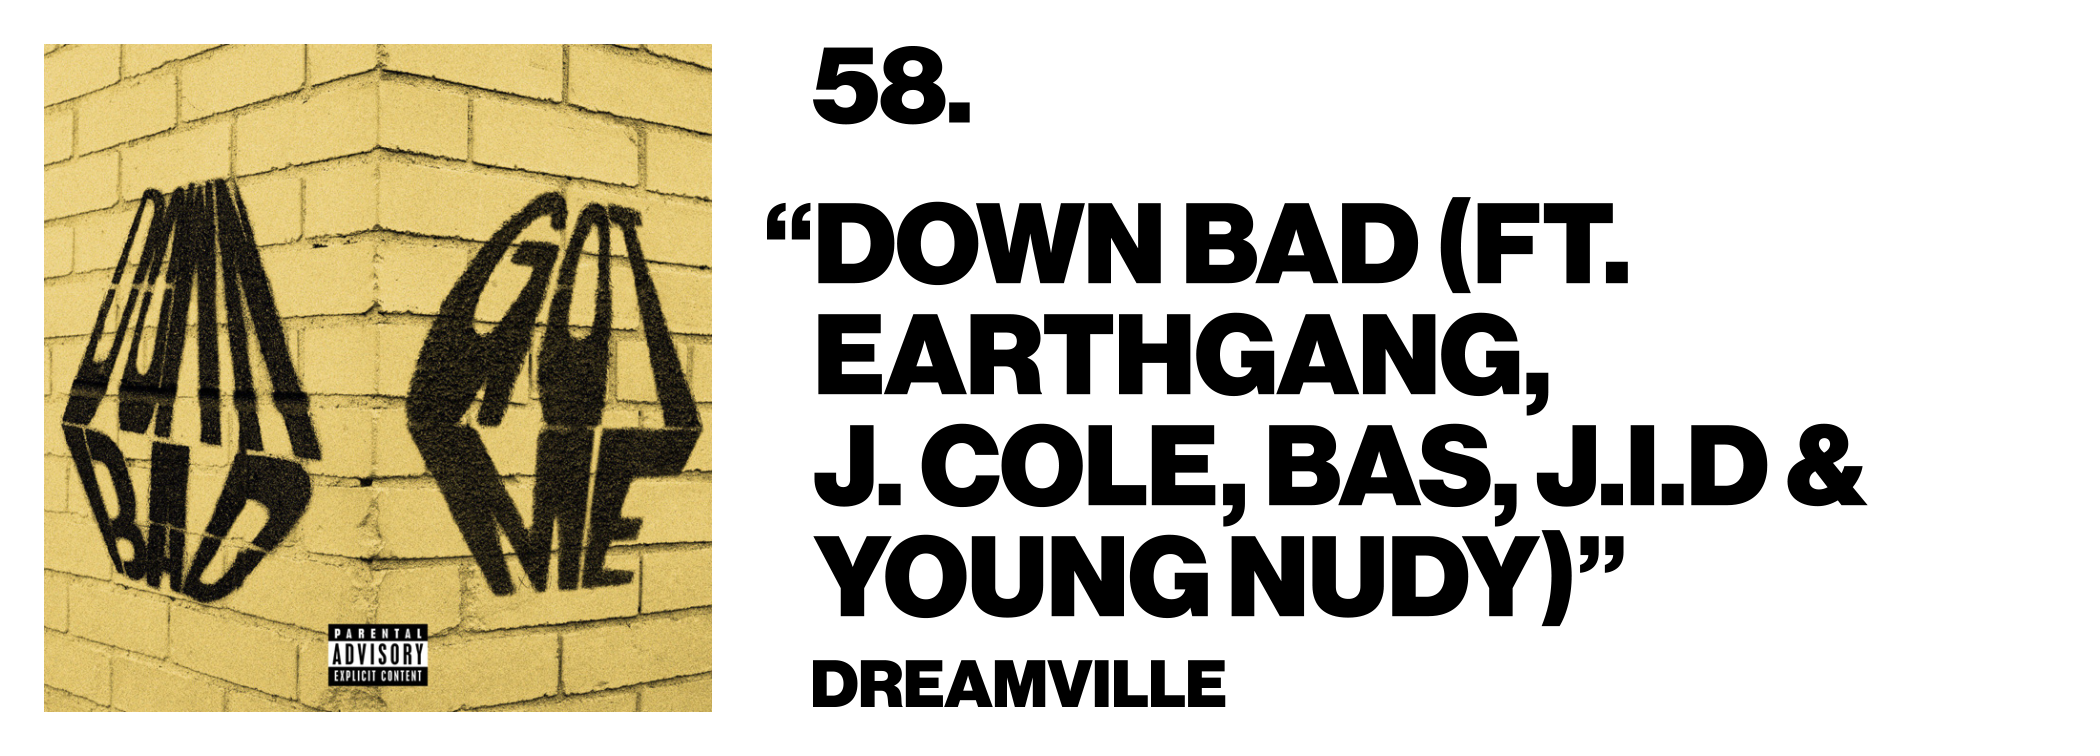 1576622153242-58-Dreamville-_Down-Bad_-Ft-EARTHGANG-J-Cole-Bas-JID-_-Young-Nudy